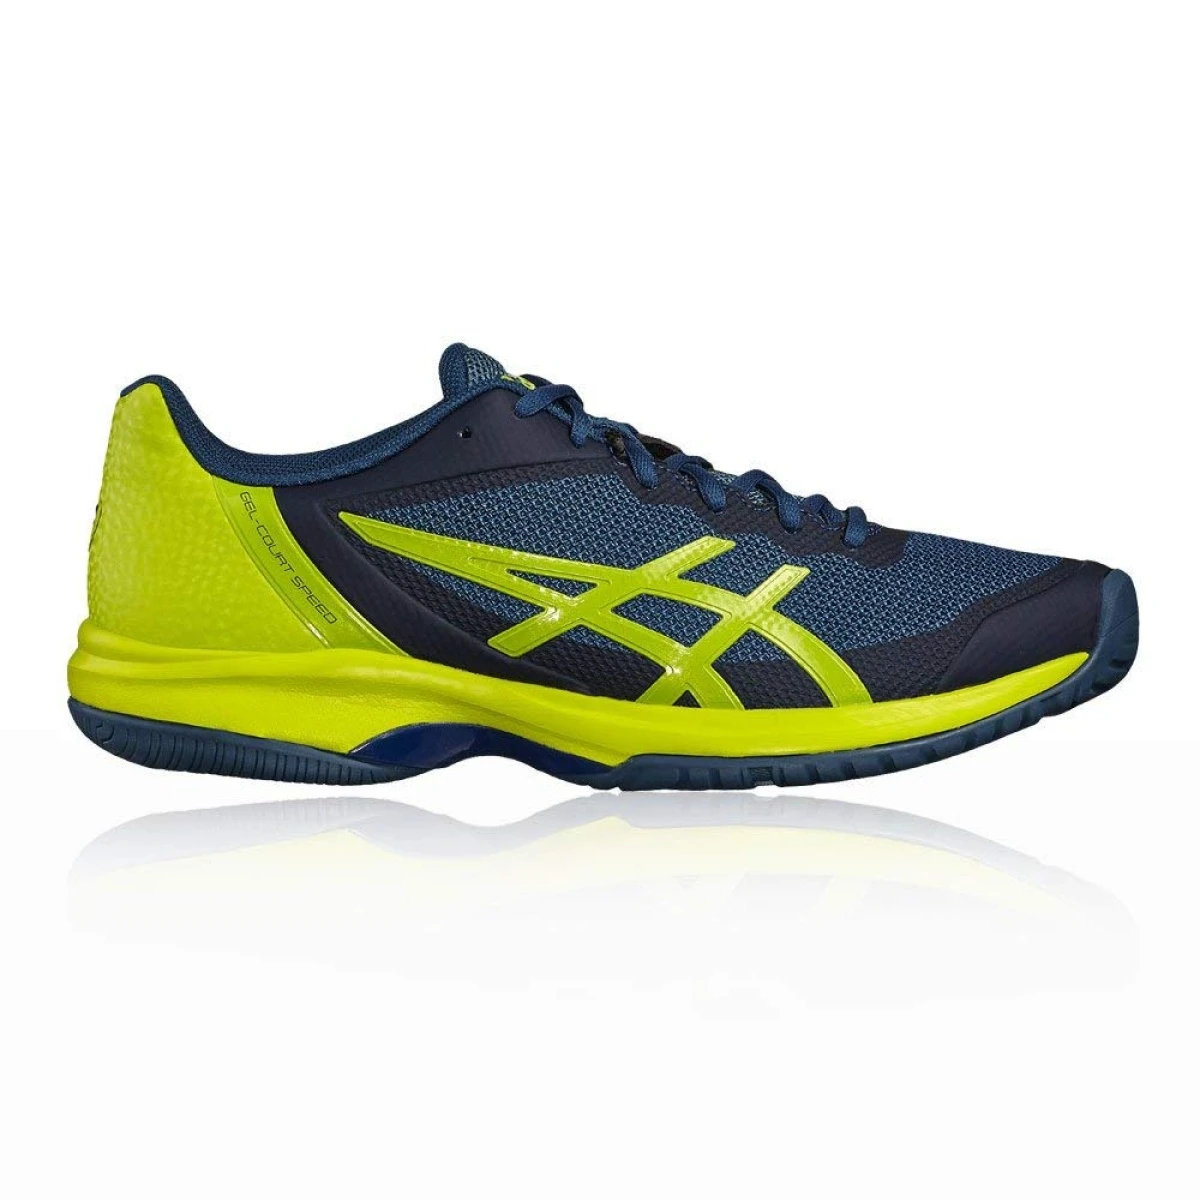 Buy Online Asics Gel Court Speed Tennis Shoes Lowest Prices